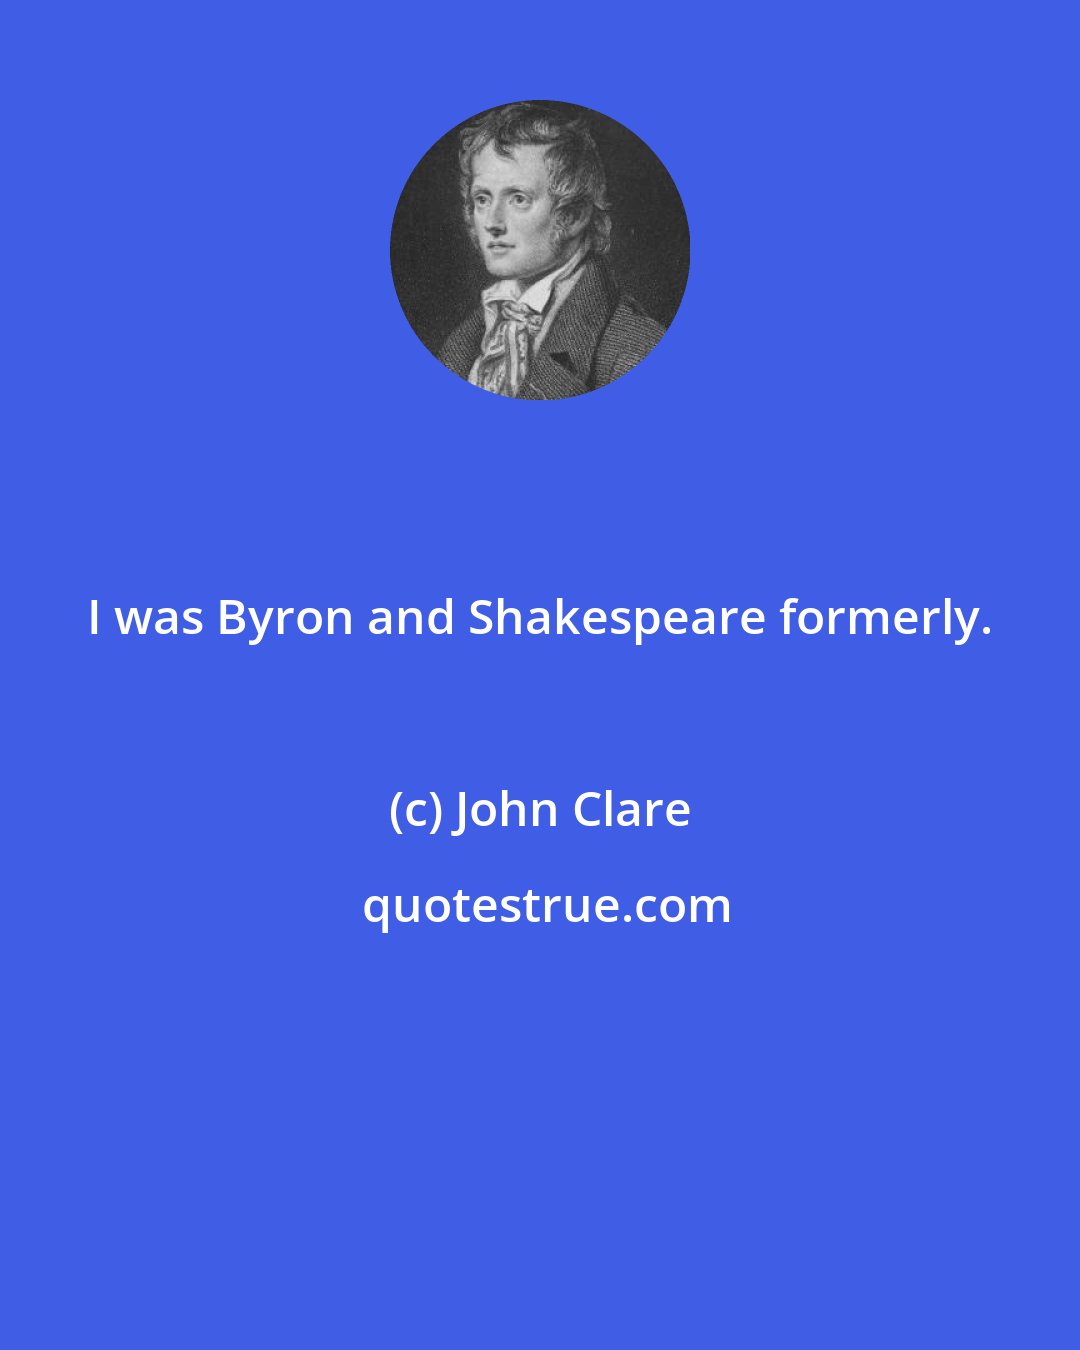 John Clare: I was Byron and Shakespeare formerly.